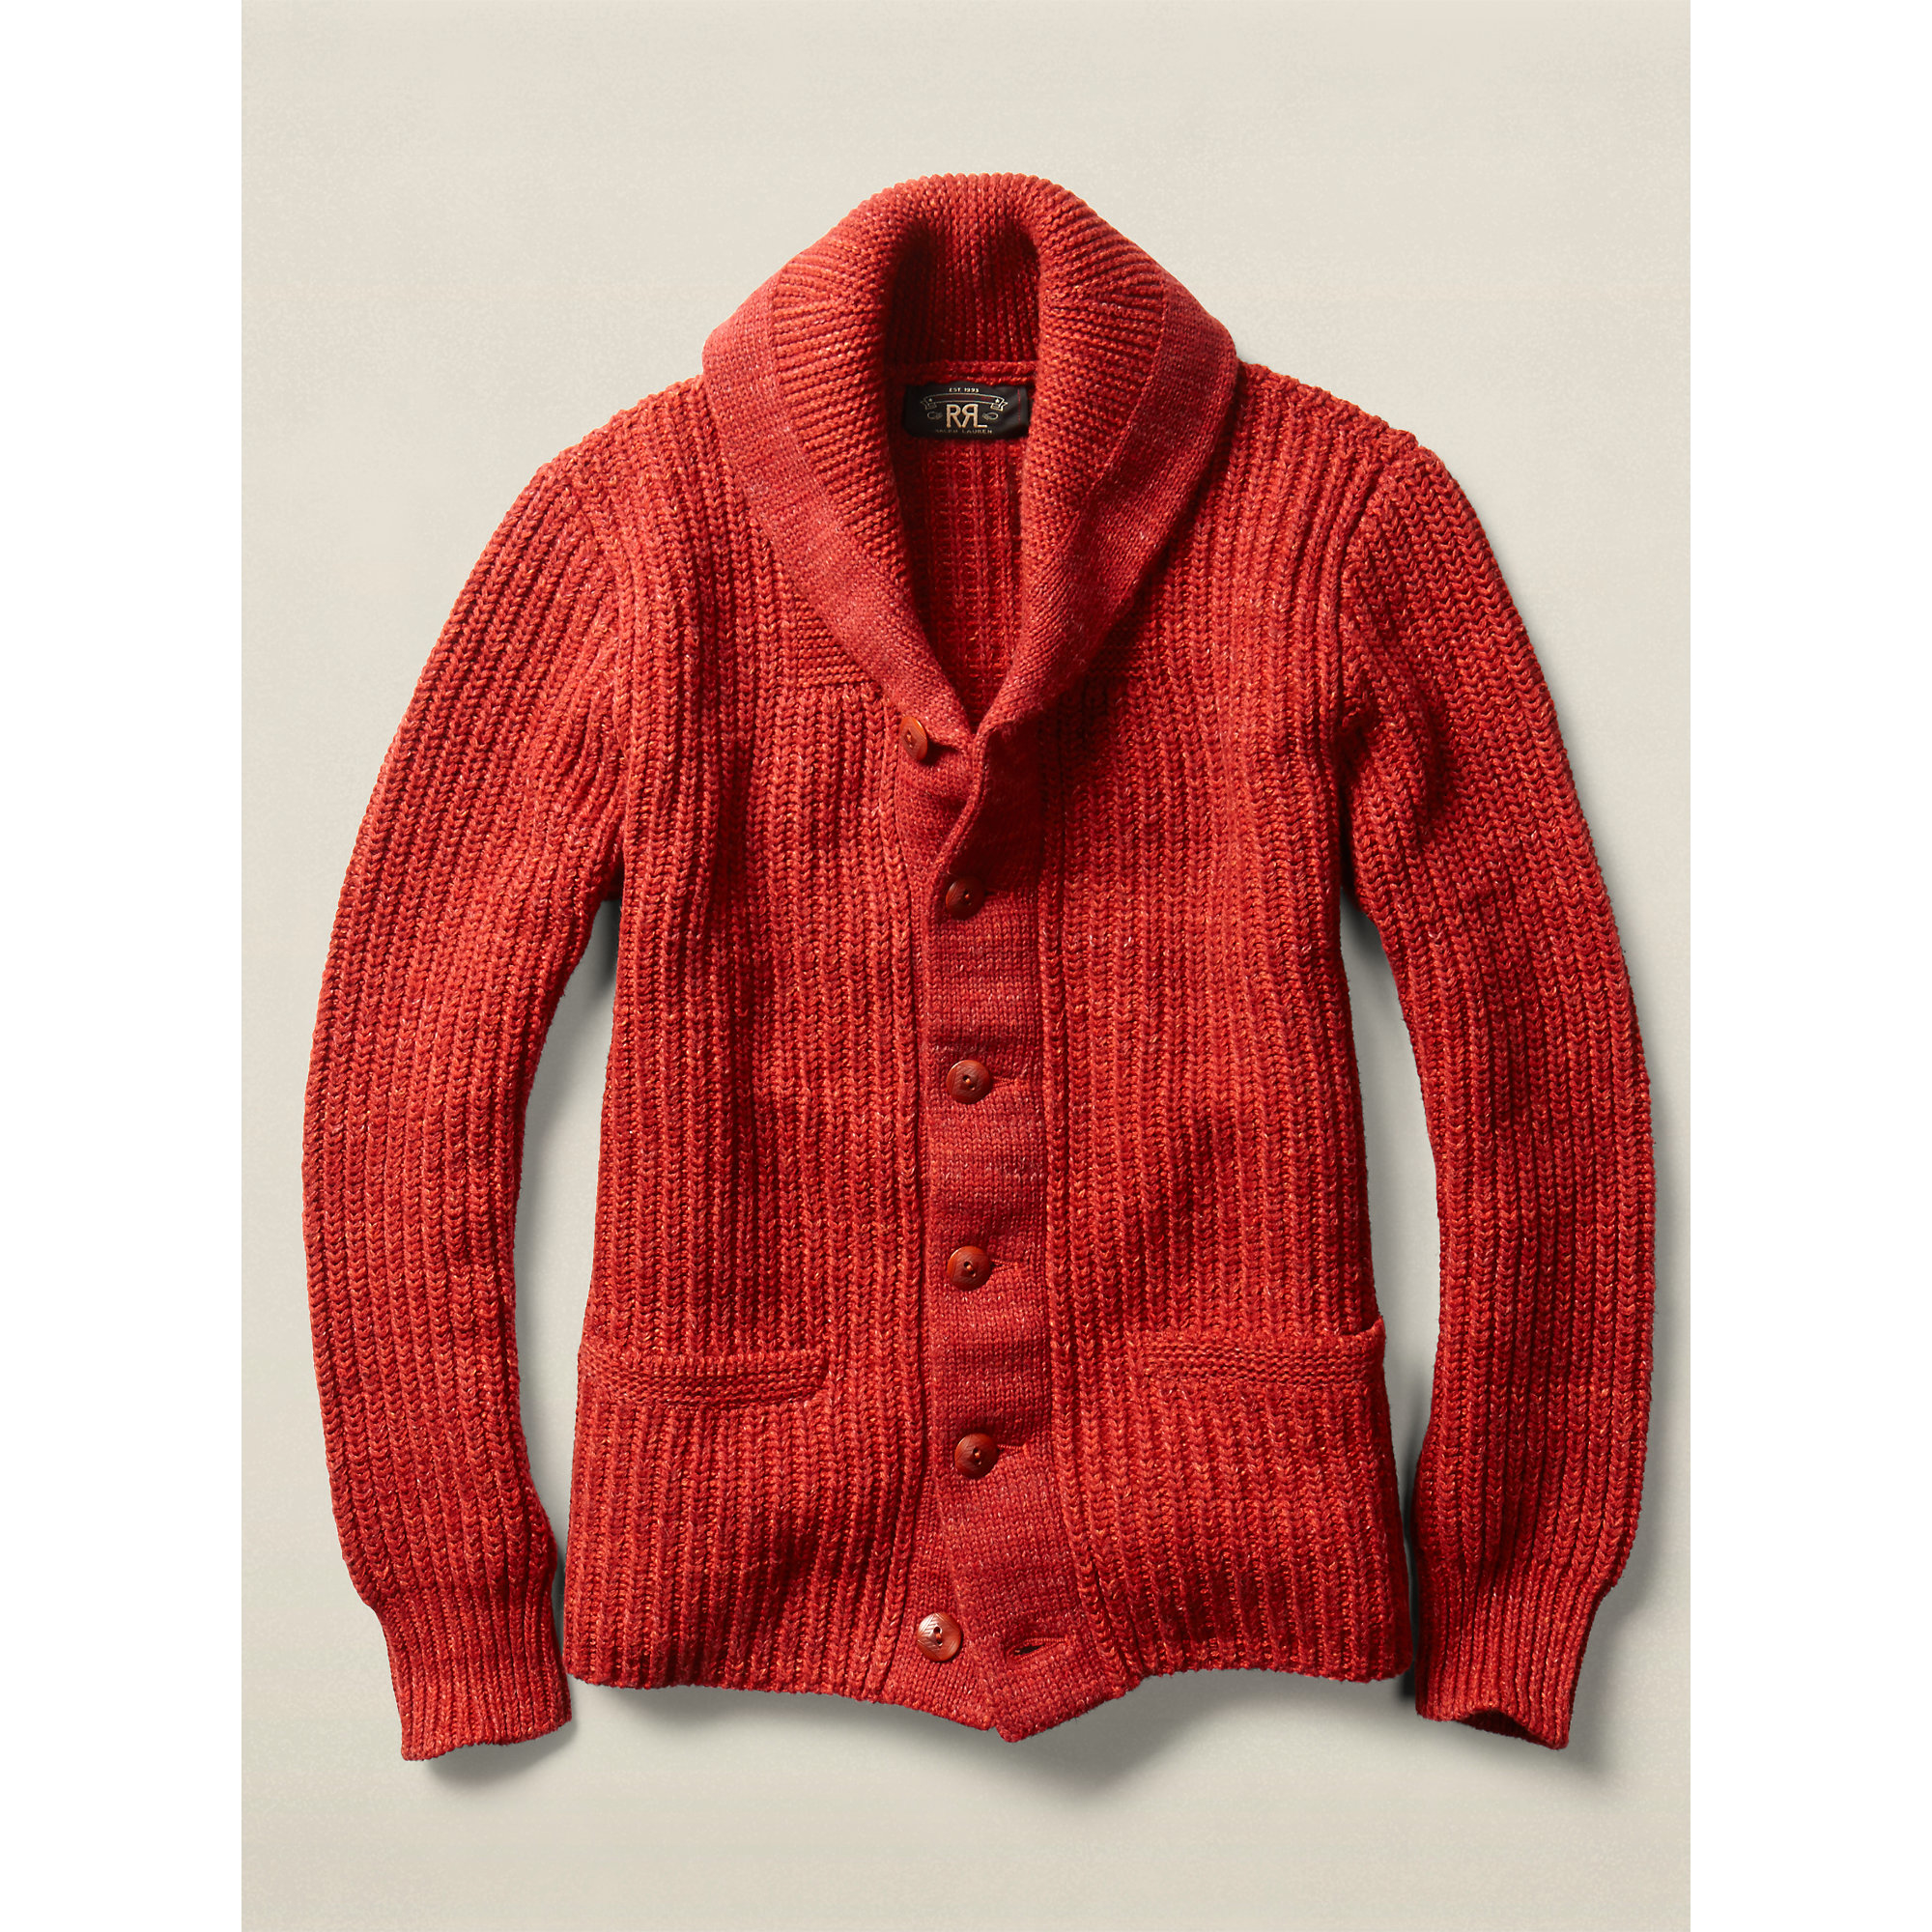 Lyst - Rrl Cotton-wool Shawl Cardigan in Red for Men